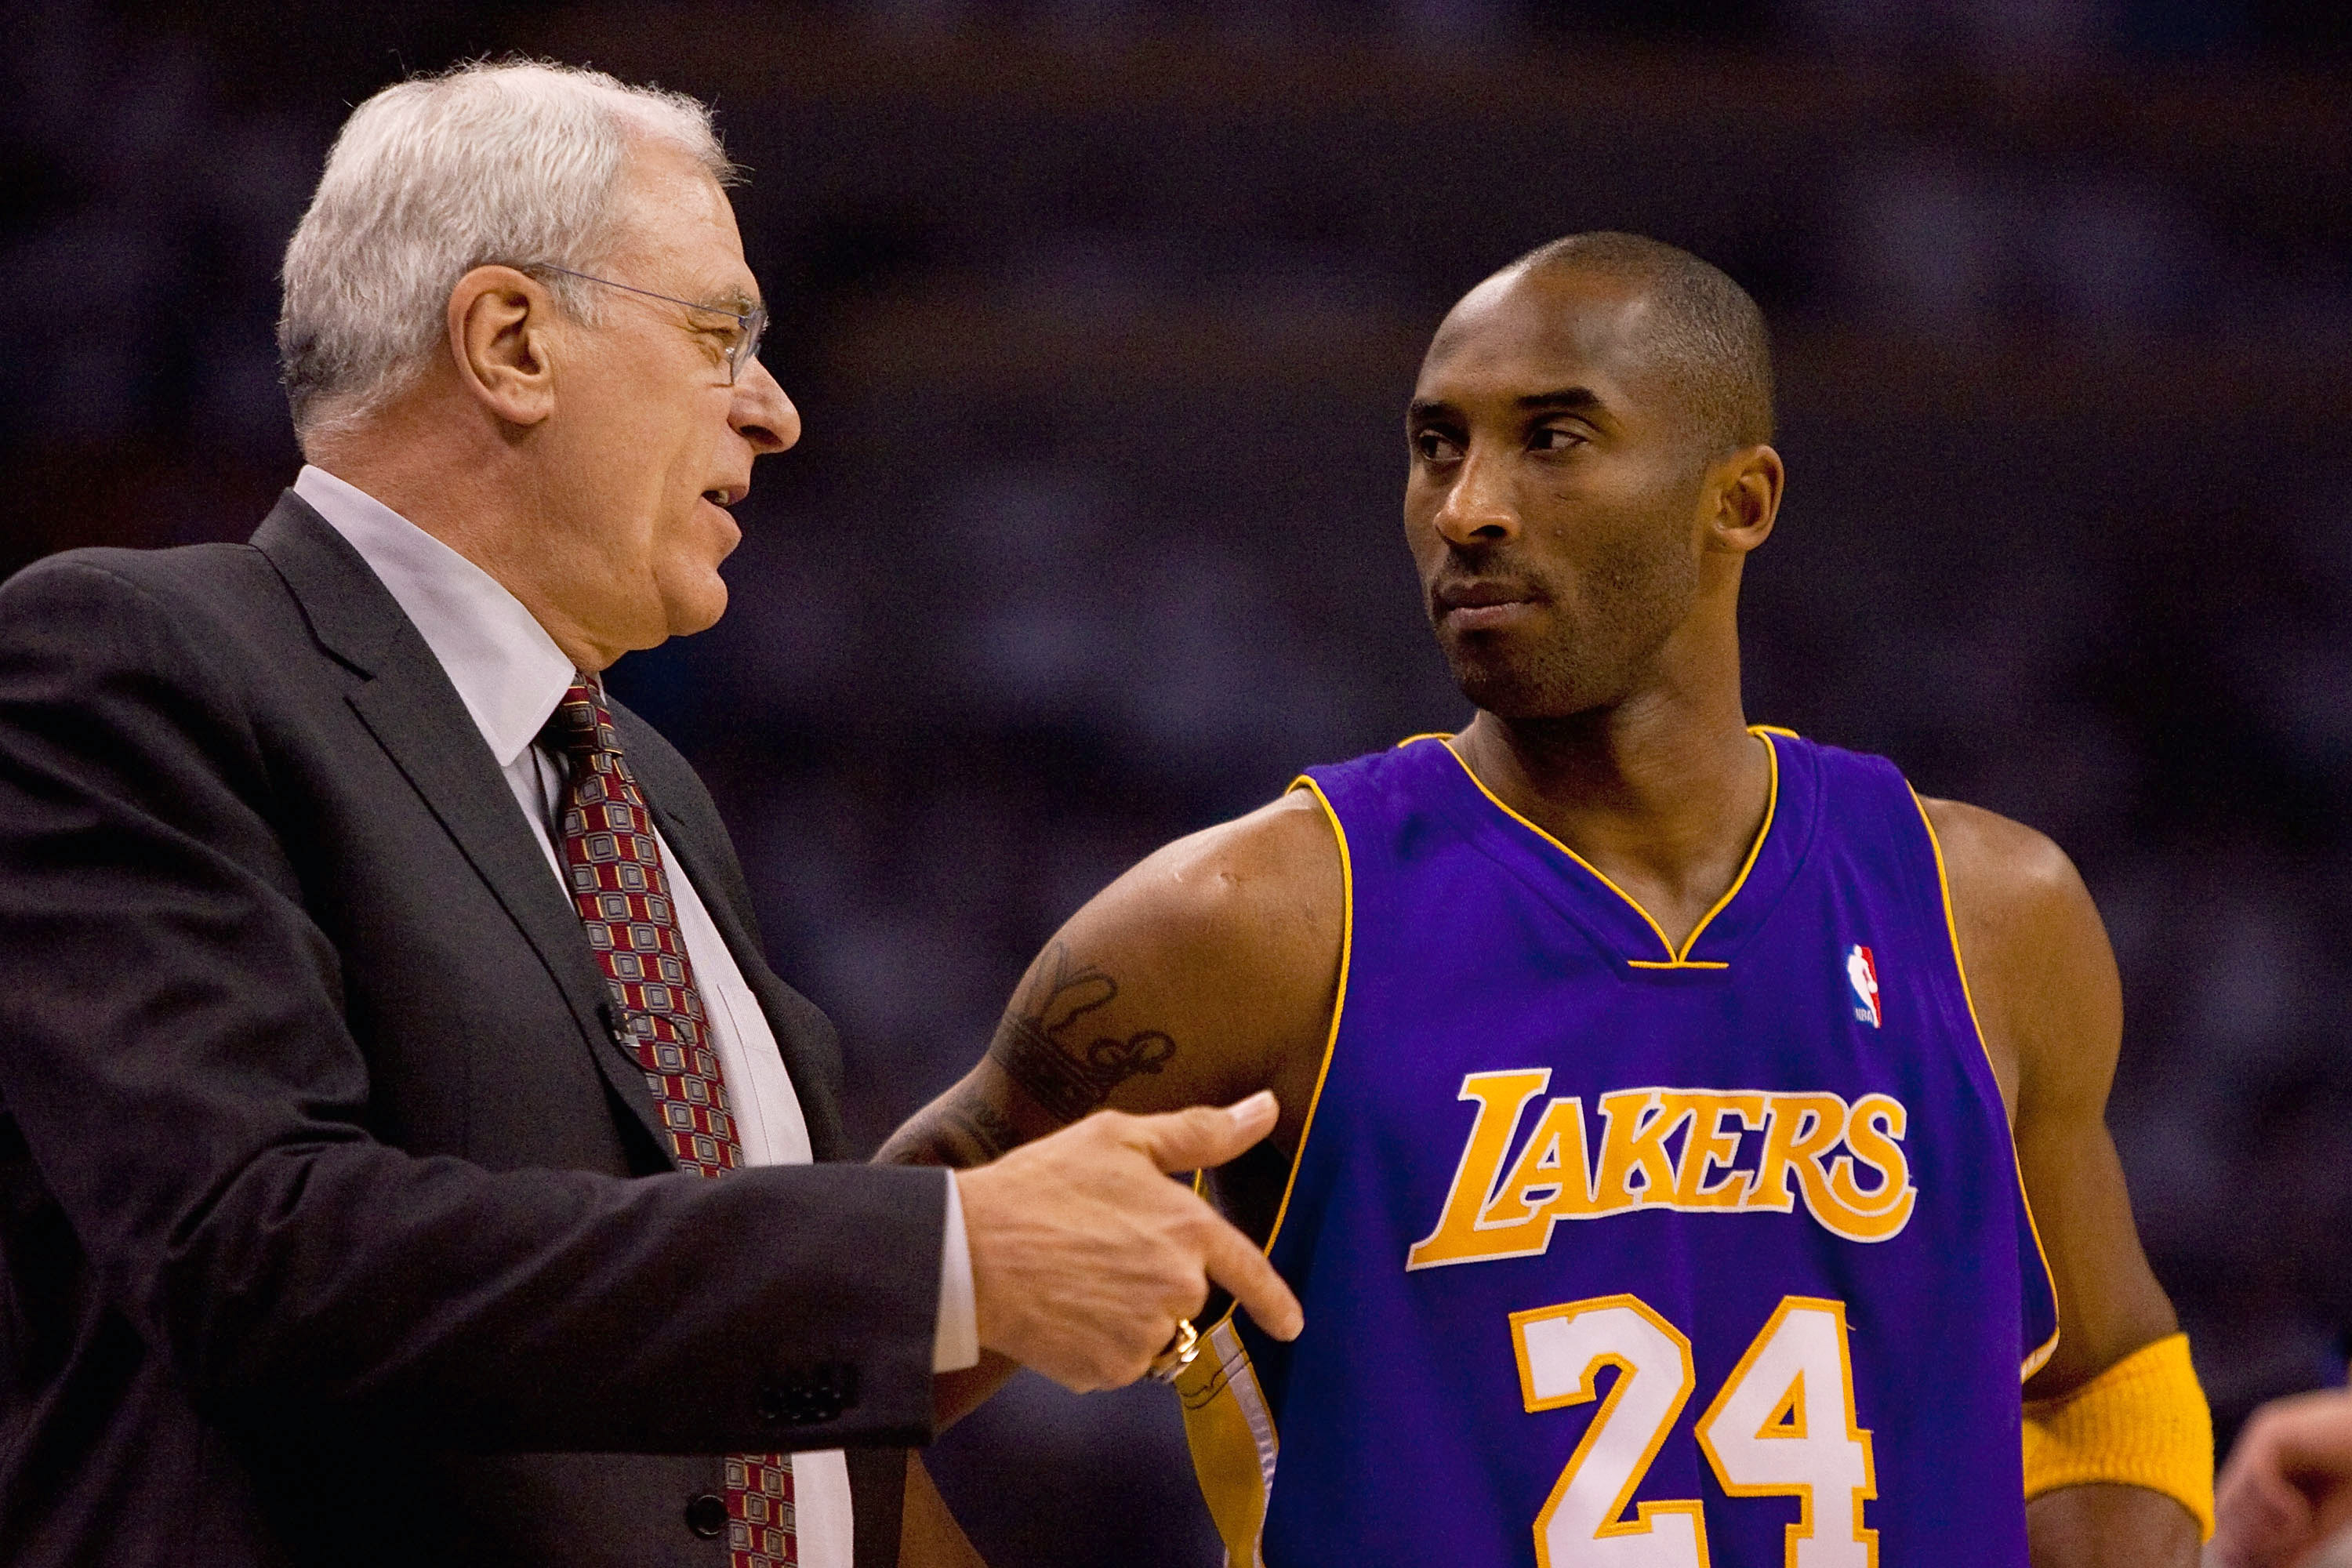 OKLAHOMA CITY - APRIL 24: Head coach Phil Jackson and Kobe Bryant #24 of the Los Angeles Lakers talk prior to playing against the Oklahoma City Thunder during Game Four of the Western Conference Quarterfinals of the 2010 NBA Playoffs on April 24, 2010 at